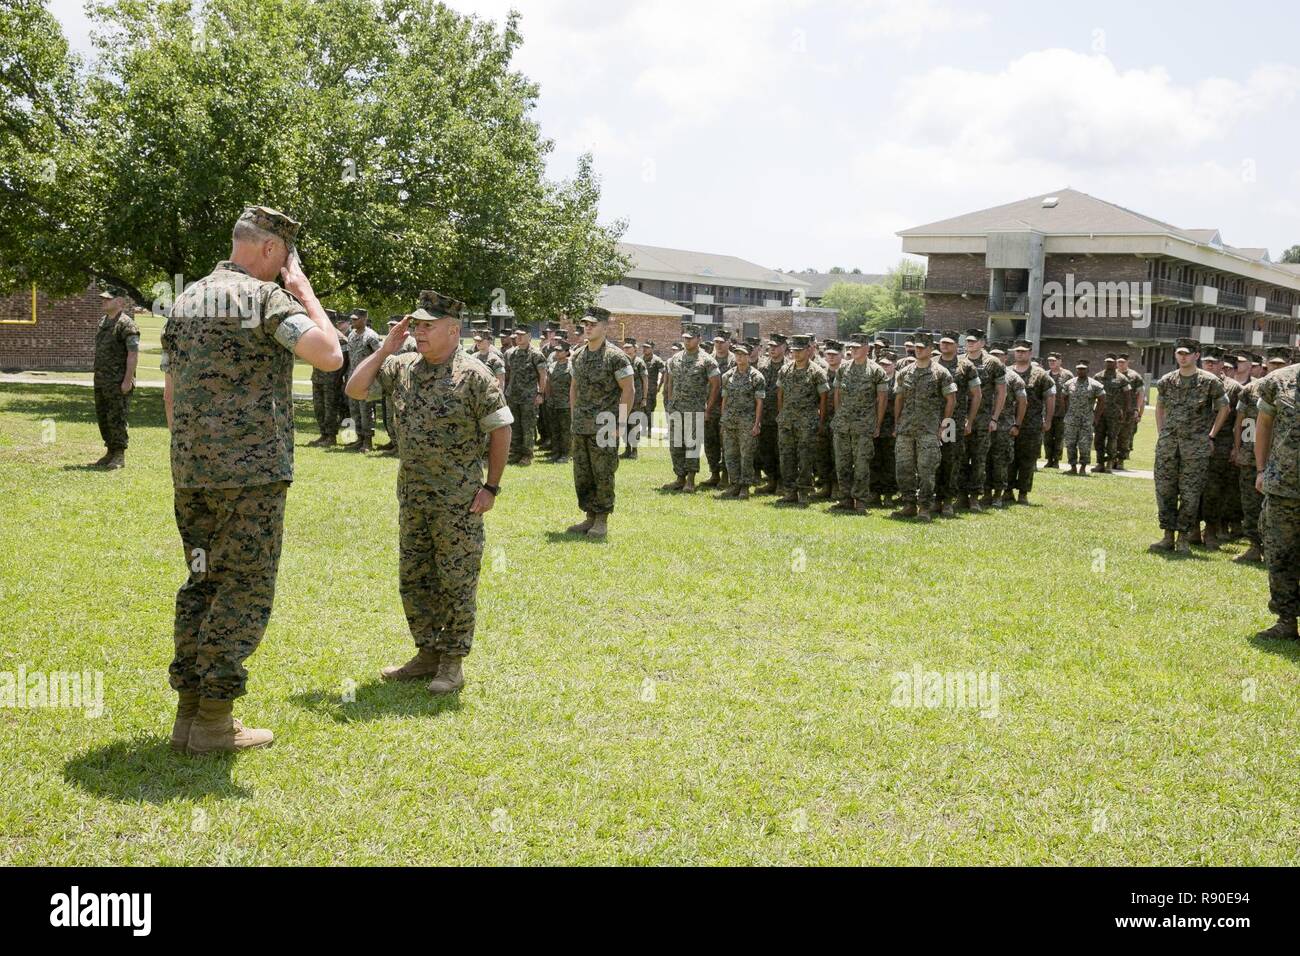 U.S. Marines and Sailors with 2nd Medical Battalion, II Marine Expeditionary Force (II MEF), stand in formation before receiving the “Lt. Gen. Chesty Puller” Outstanding Leadership Award on Camp Lejeune, N.C., May 10, 2017. The battalion earned this award for exceptional professional ability, superior performance and dedication to supporting the mission of the II MEF. Stock Photo